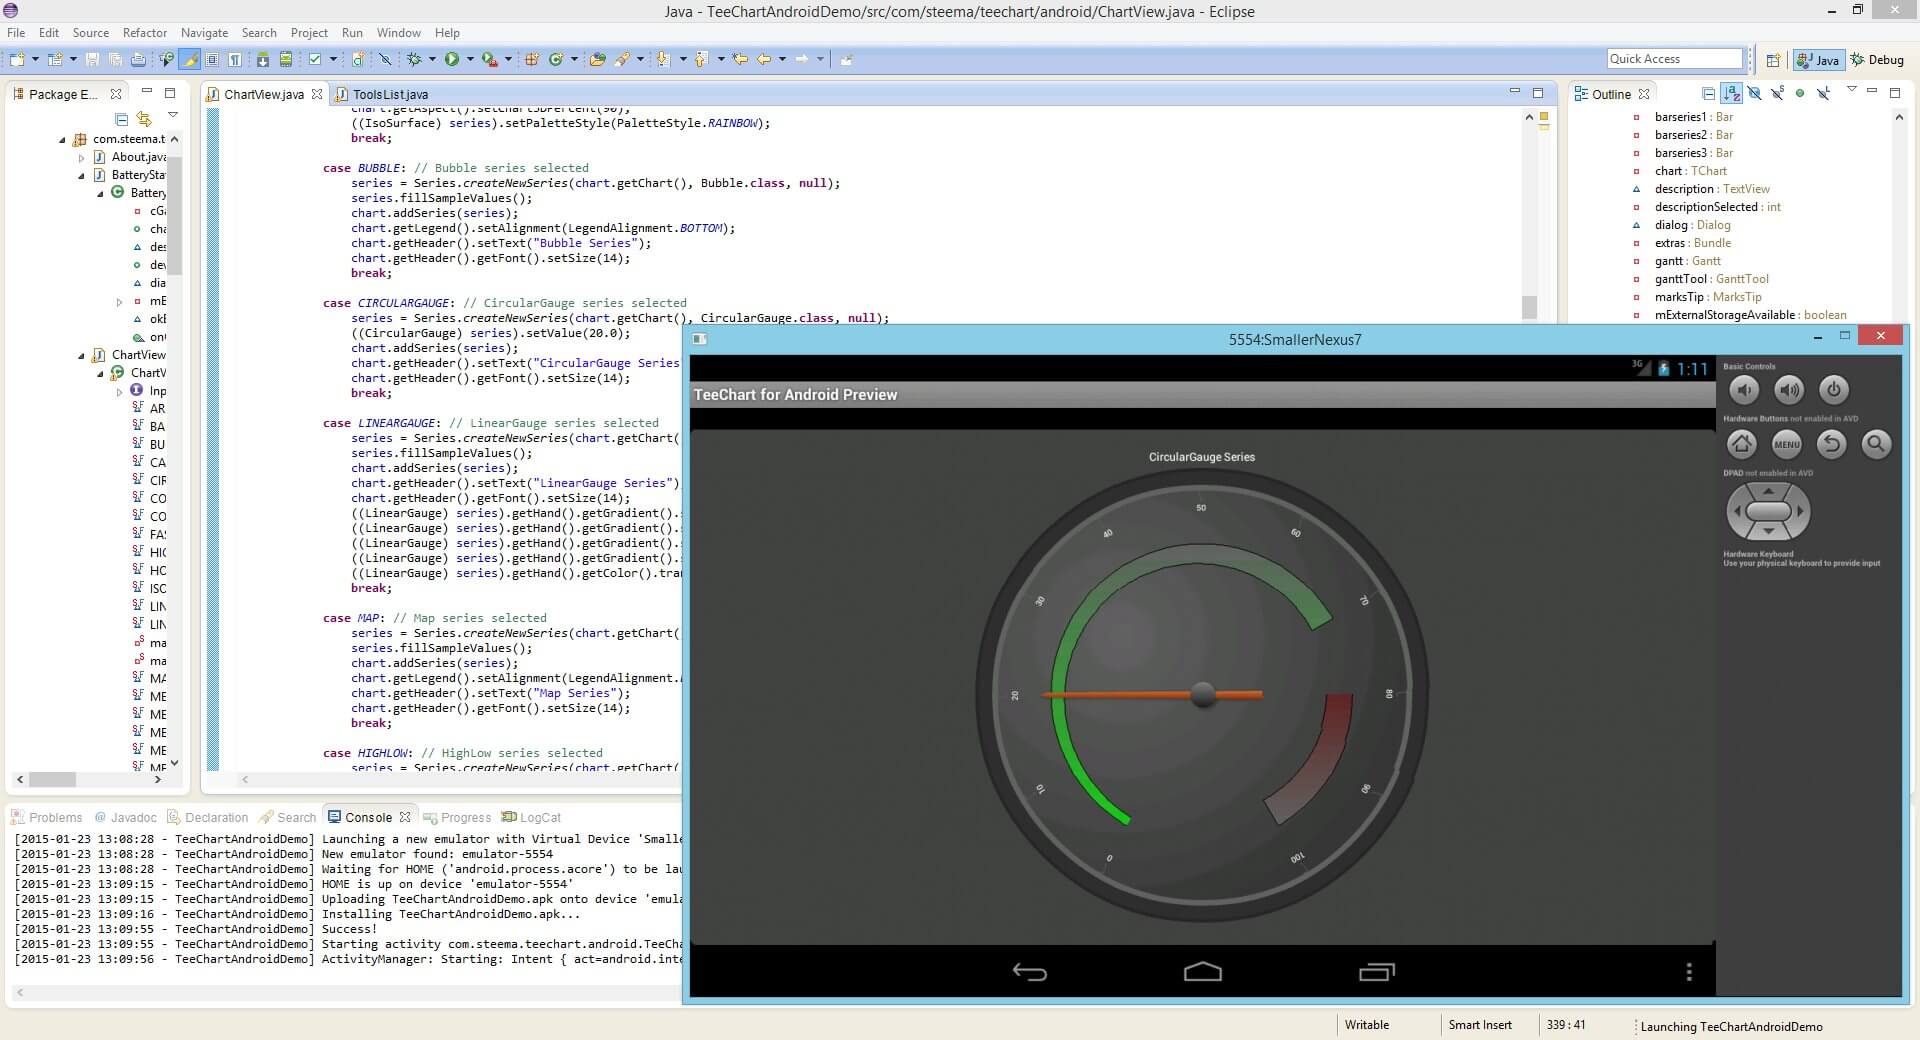 TeeChart Java for Android offers Circular and Linear Gauge types.